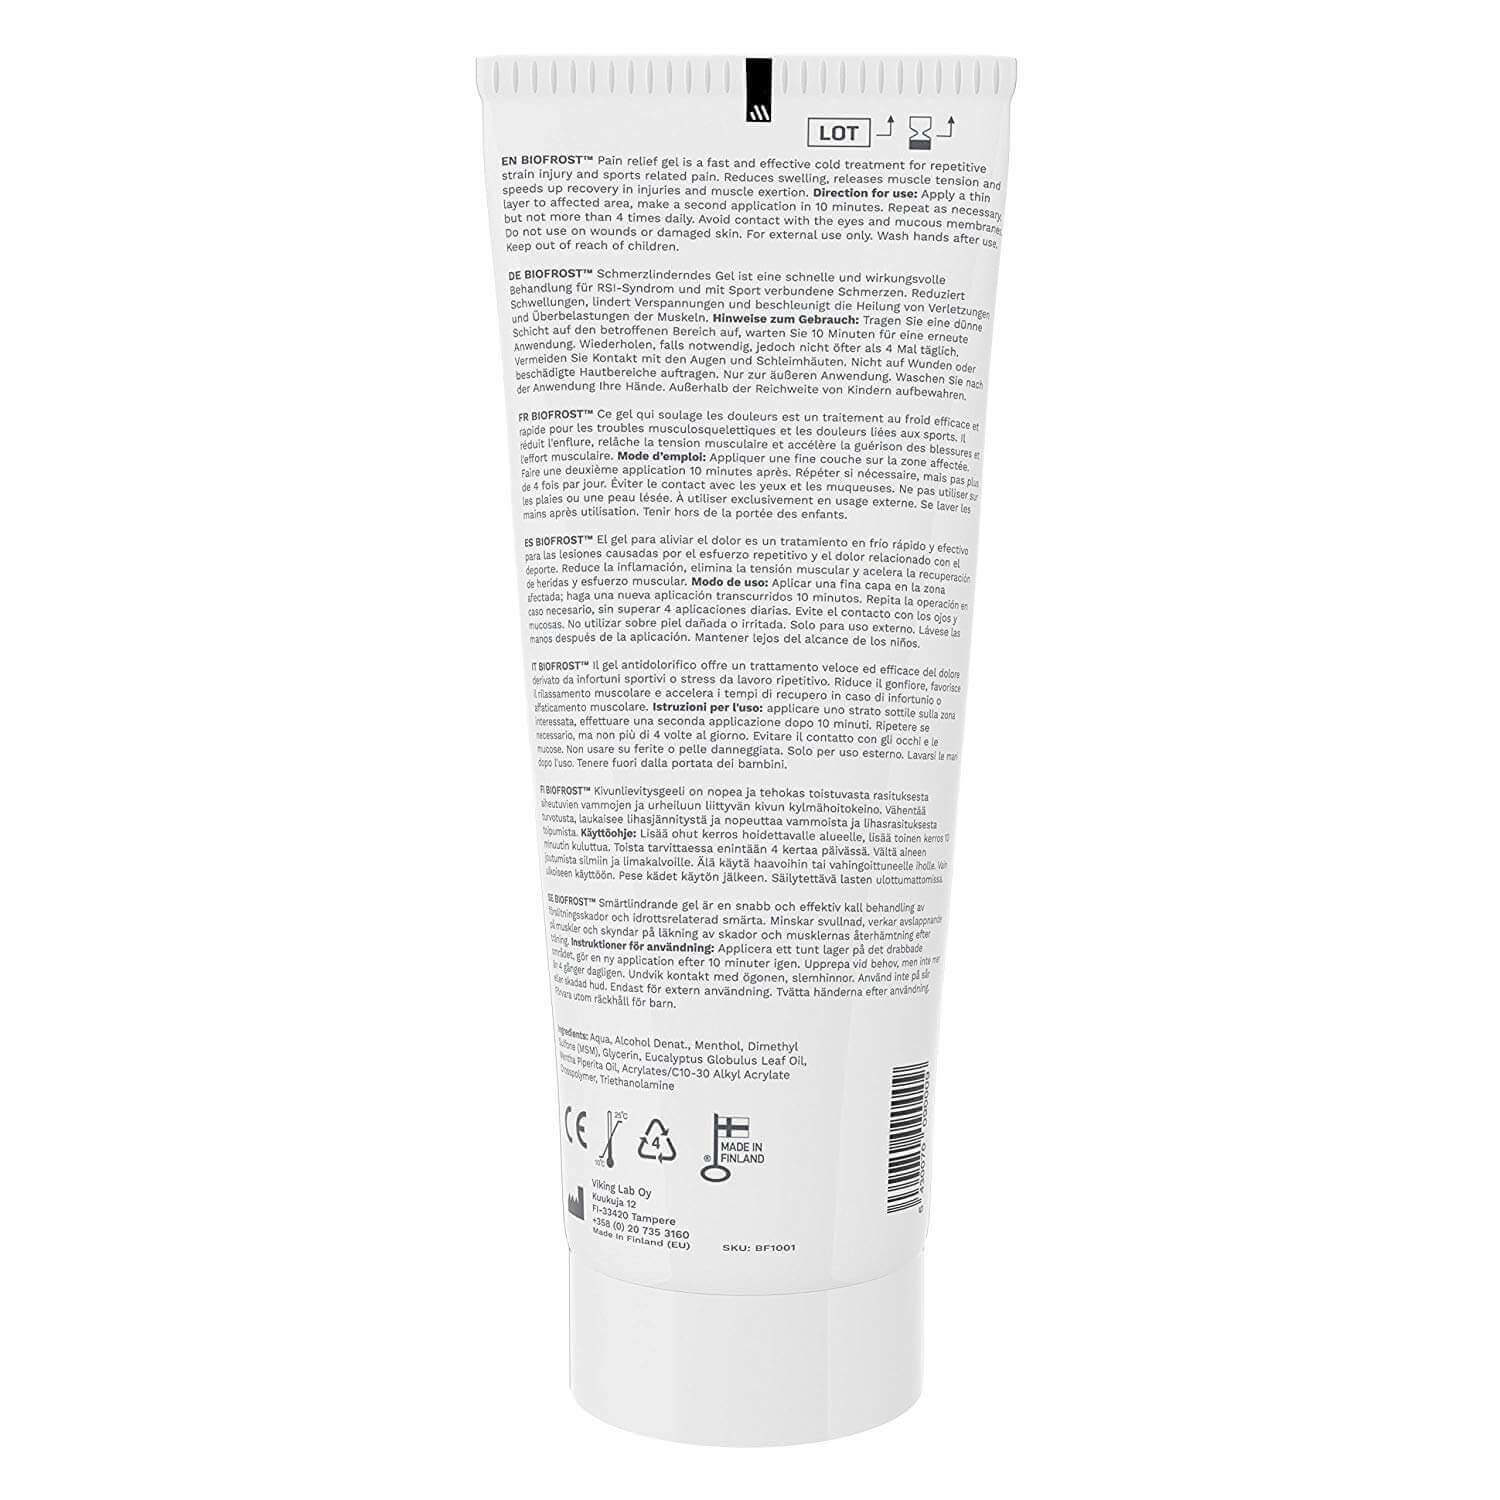 pain relief gel - tube back side